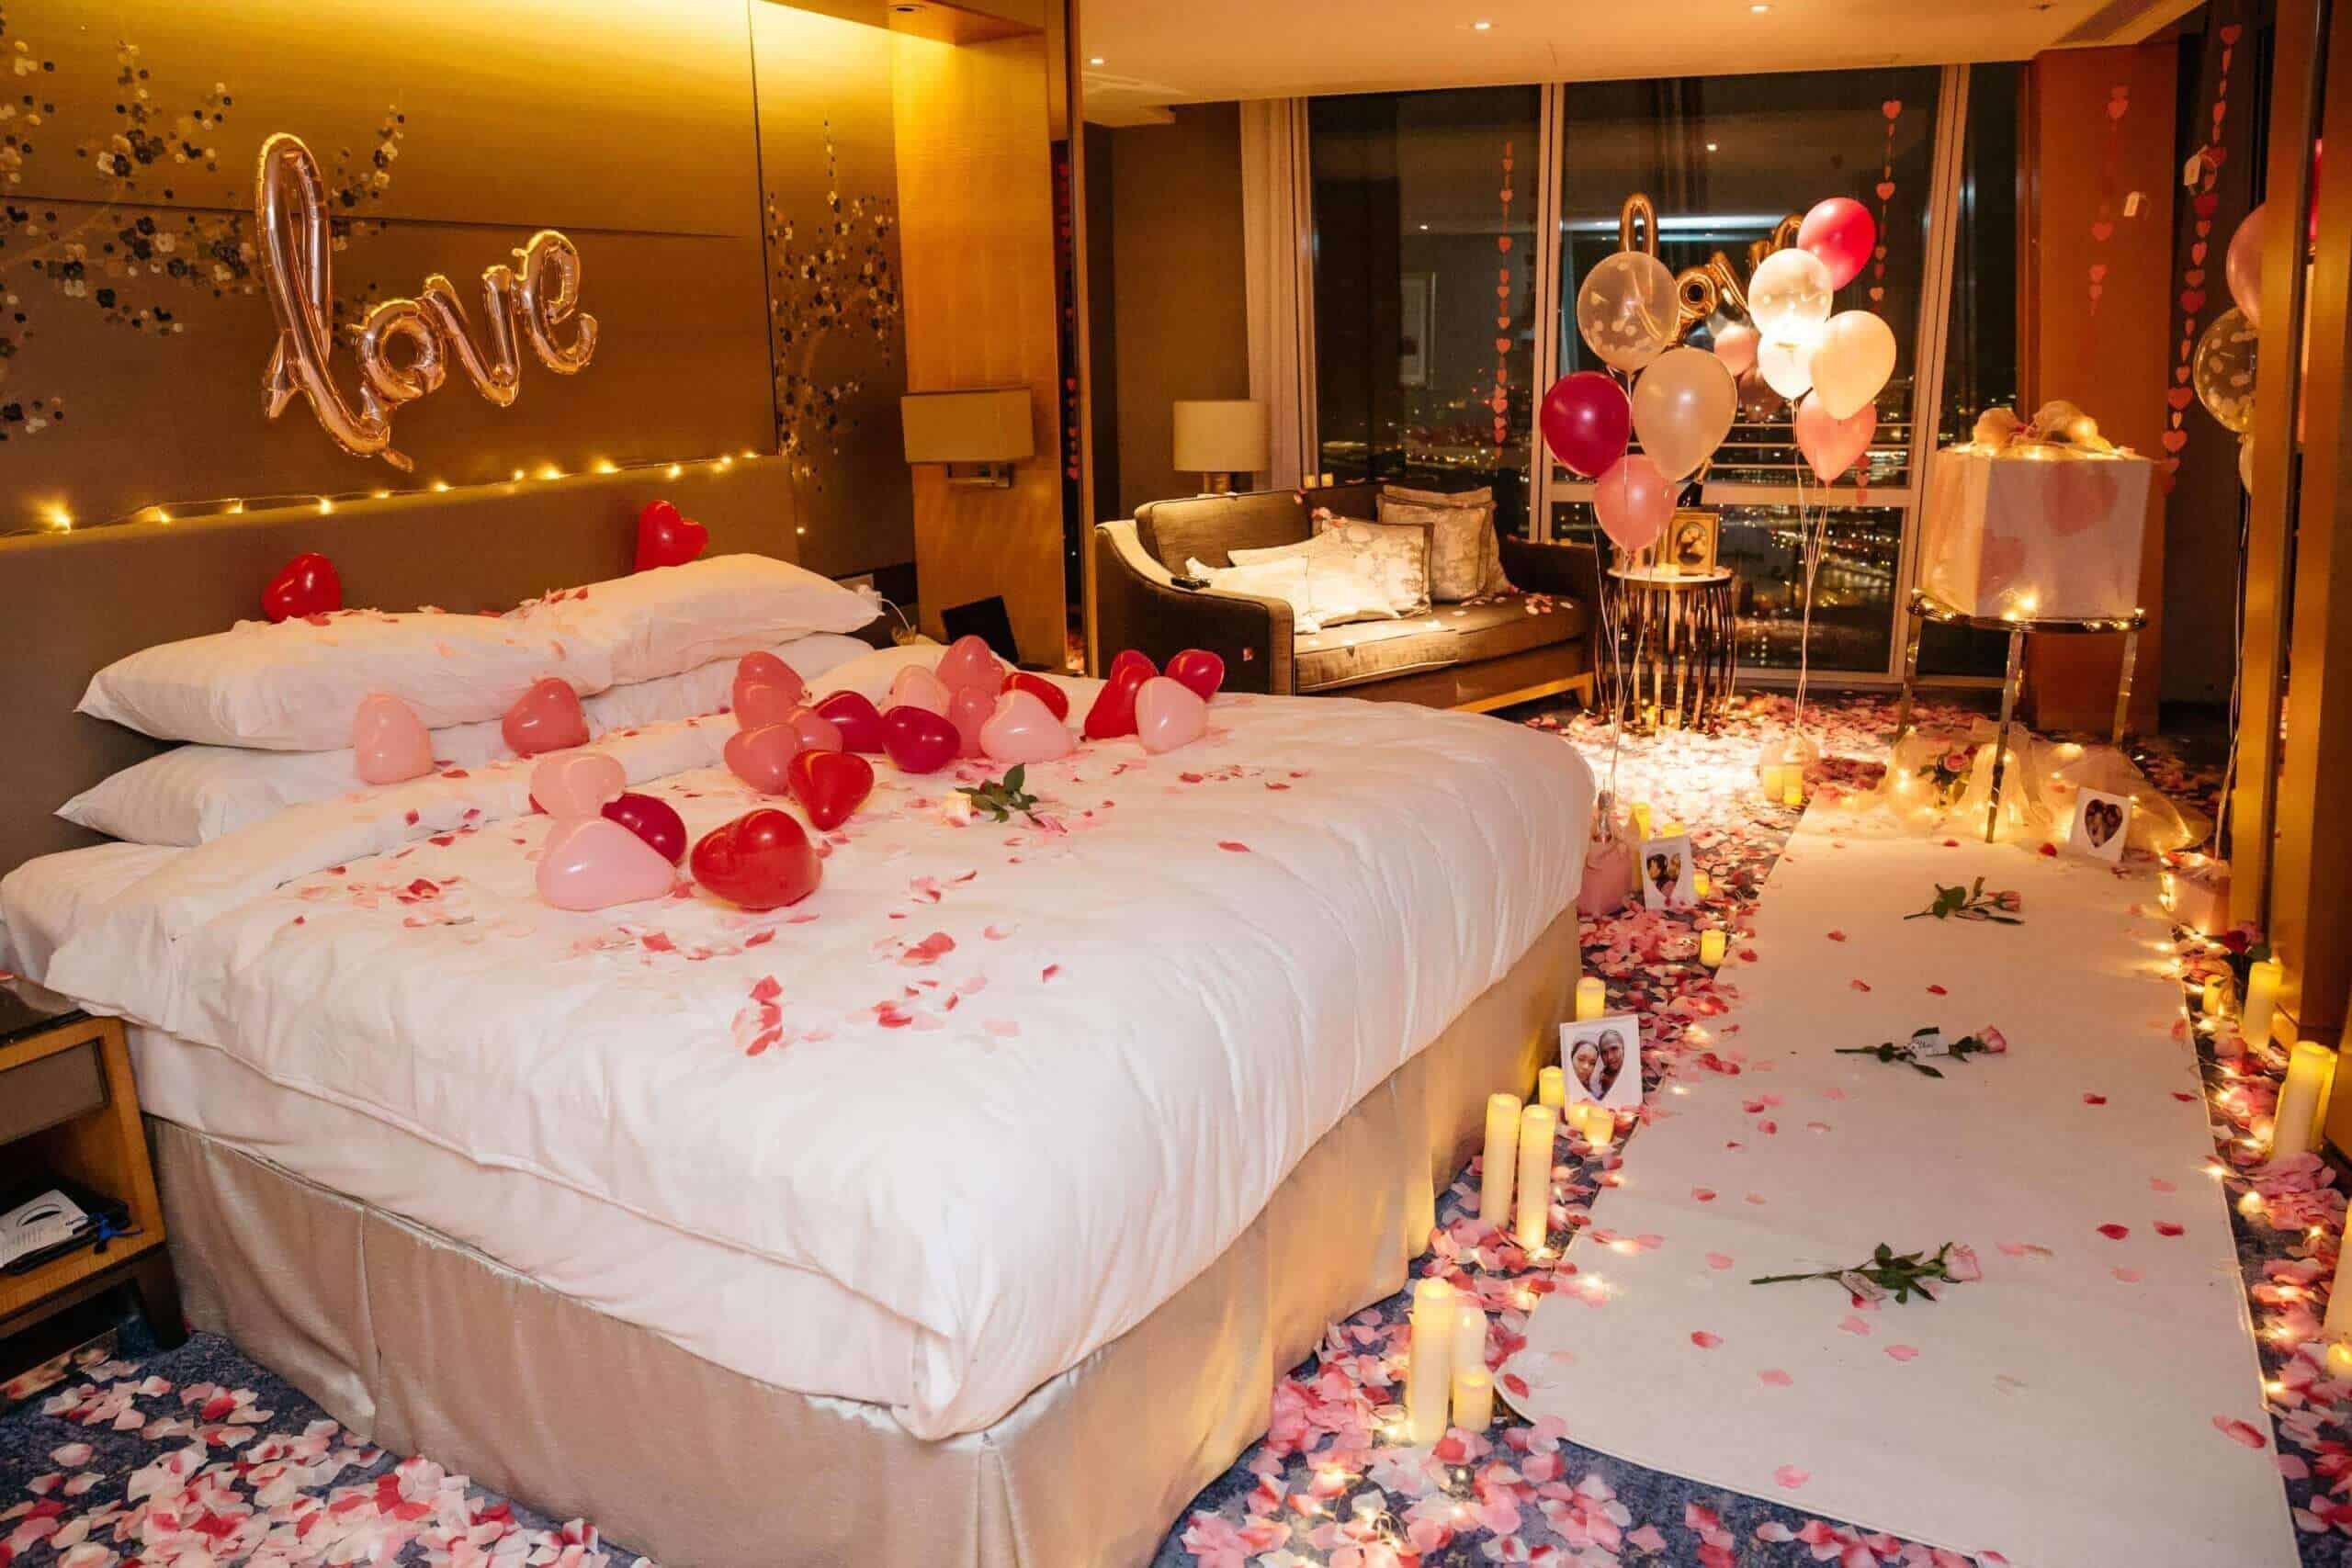 7 Easy Ways To Decorate Your Room This Valentine Season